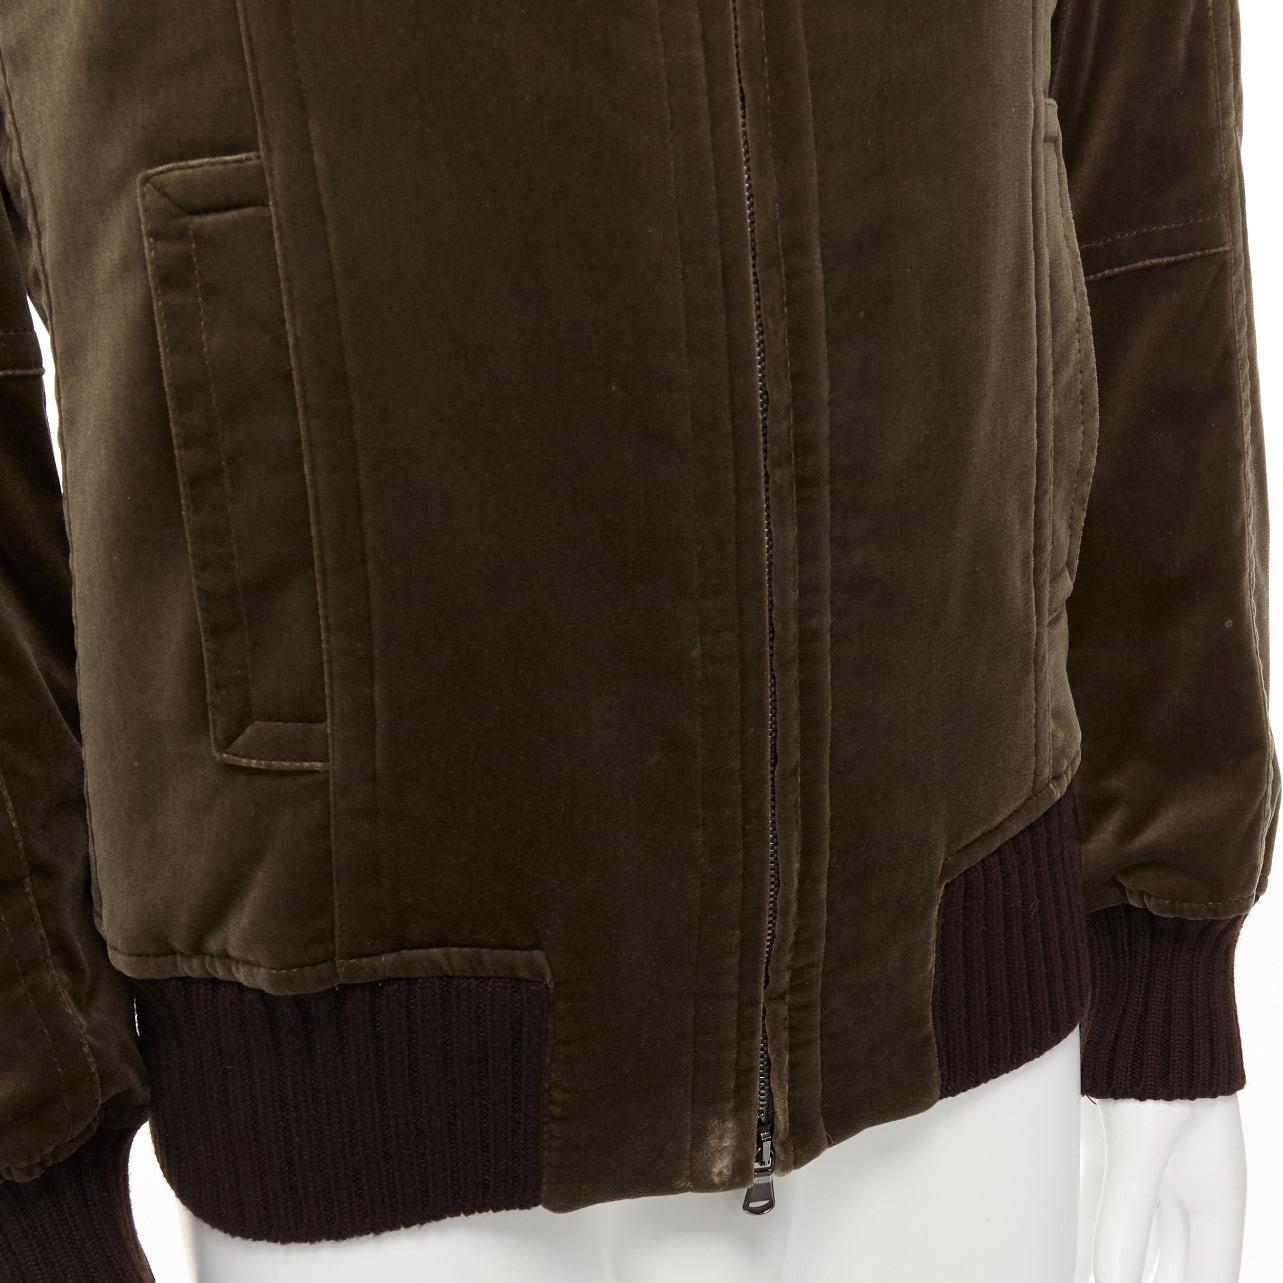 COSTUME NATIONAL smoked khaki cotton blend velvet panelled zip bomber IT50 L
Reference: JSLE/A00102
Brand: Costume National
Material: Velour
Color: Khaki
Pattern: Solid
Closure: Zip
Lining: Black Fabric
Extra Details: Panelled back.
Made in: